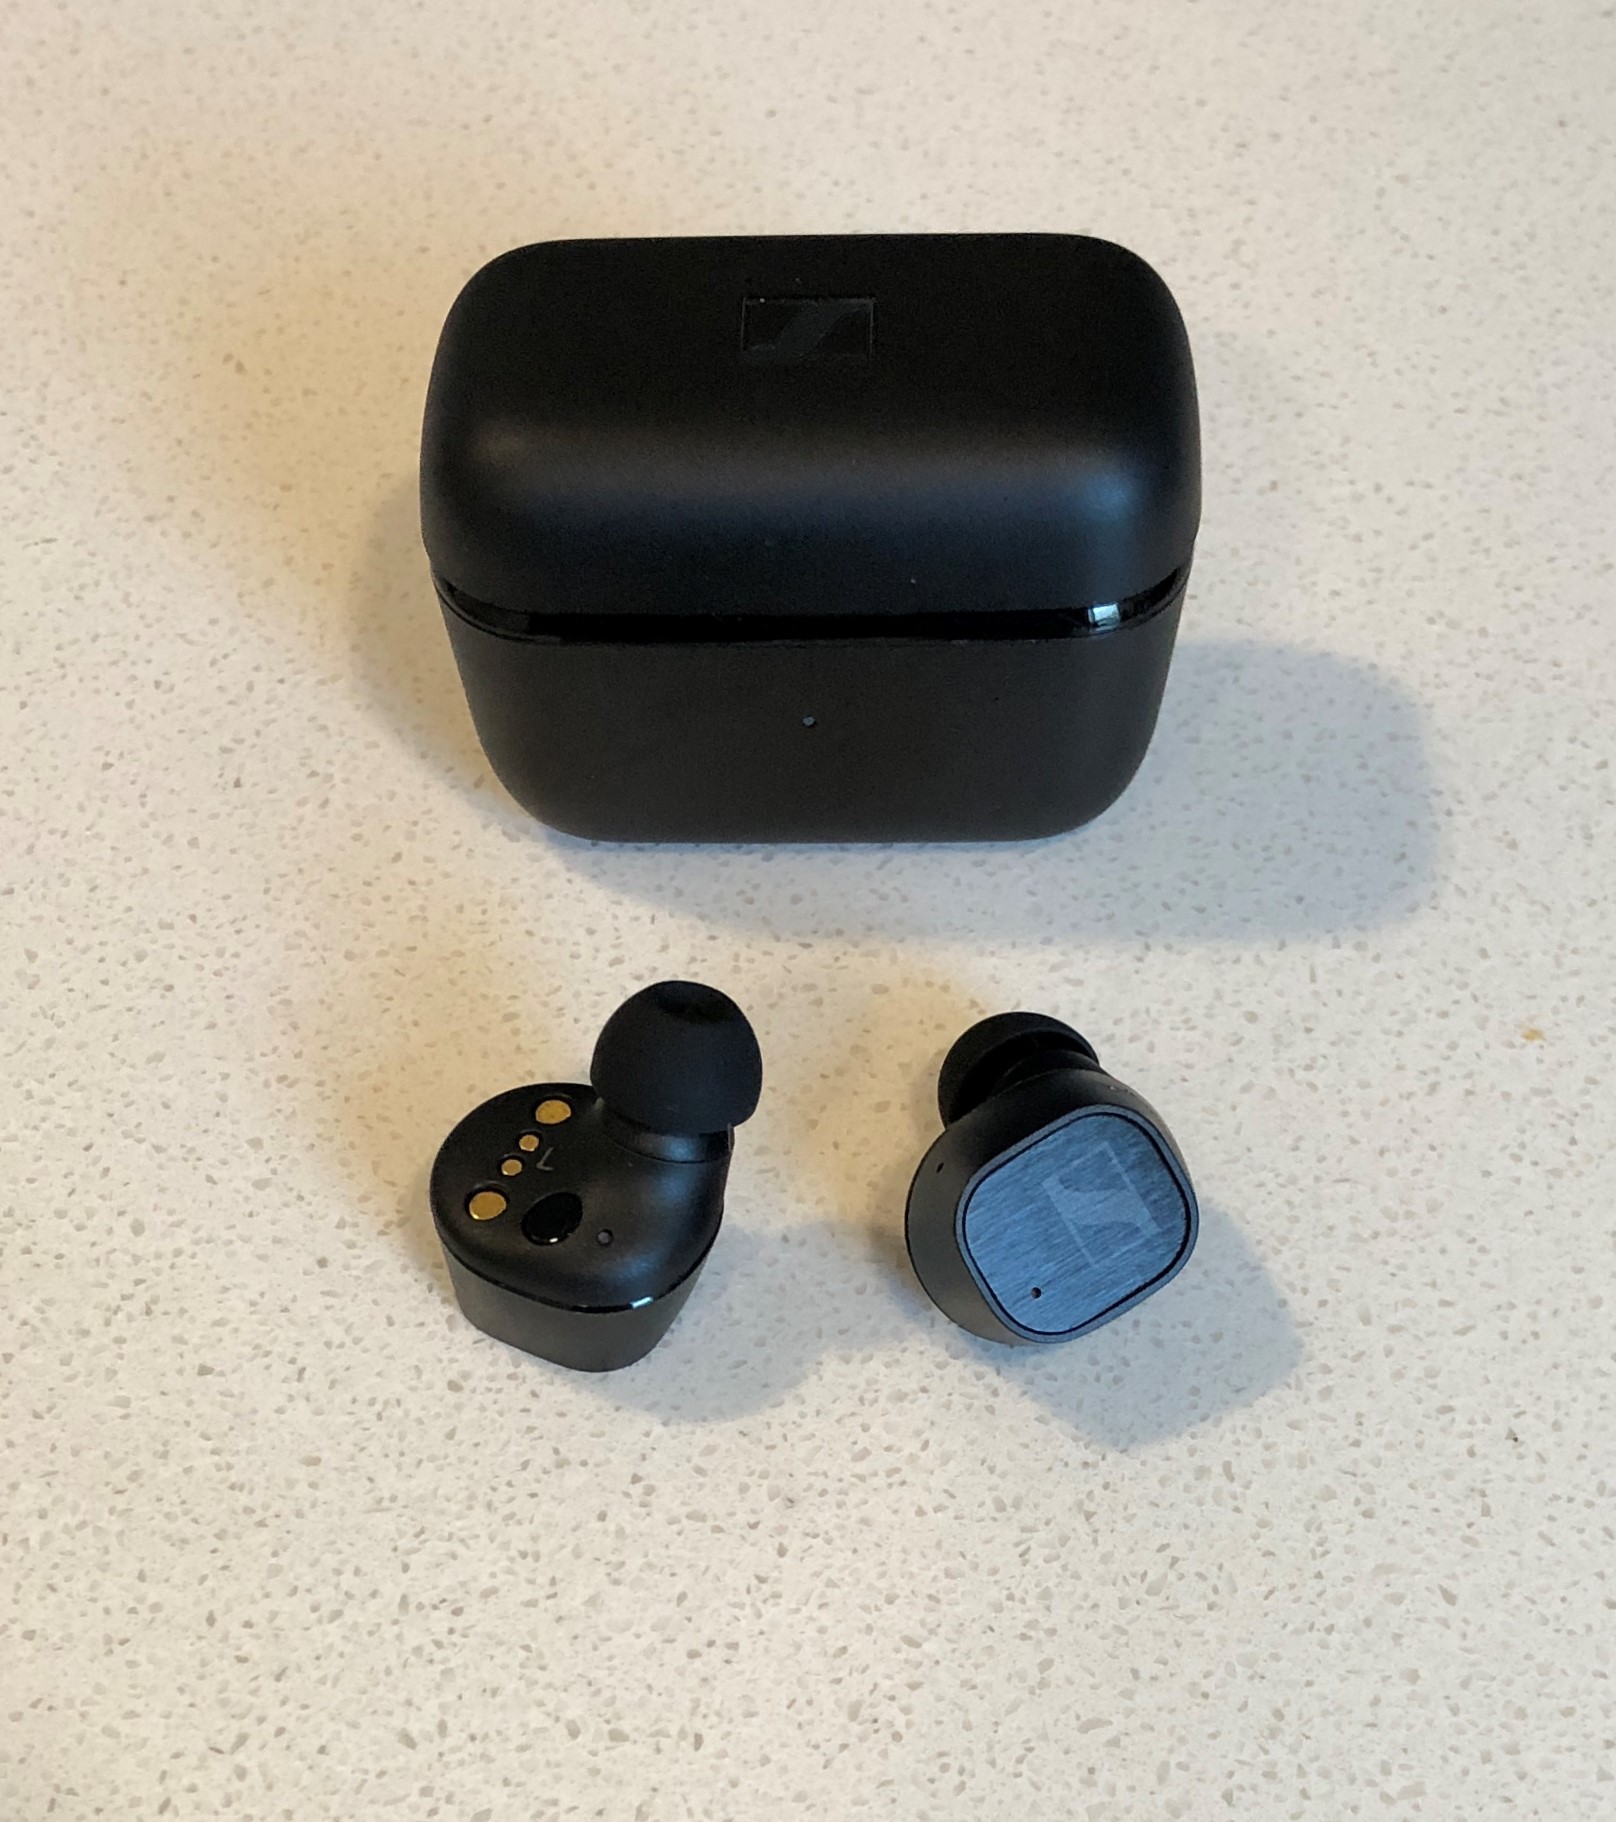 Sennheiser CX Plus charging case and wireless earbuds